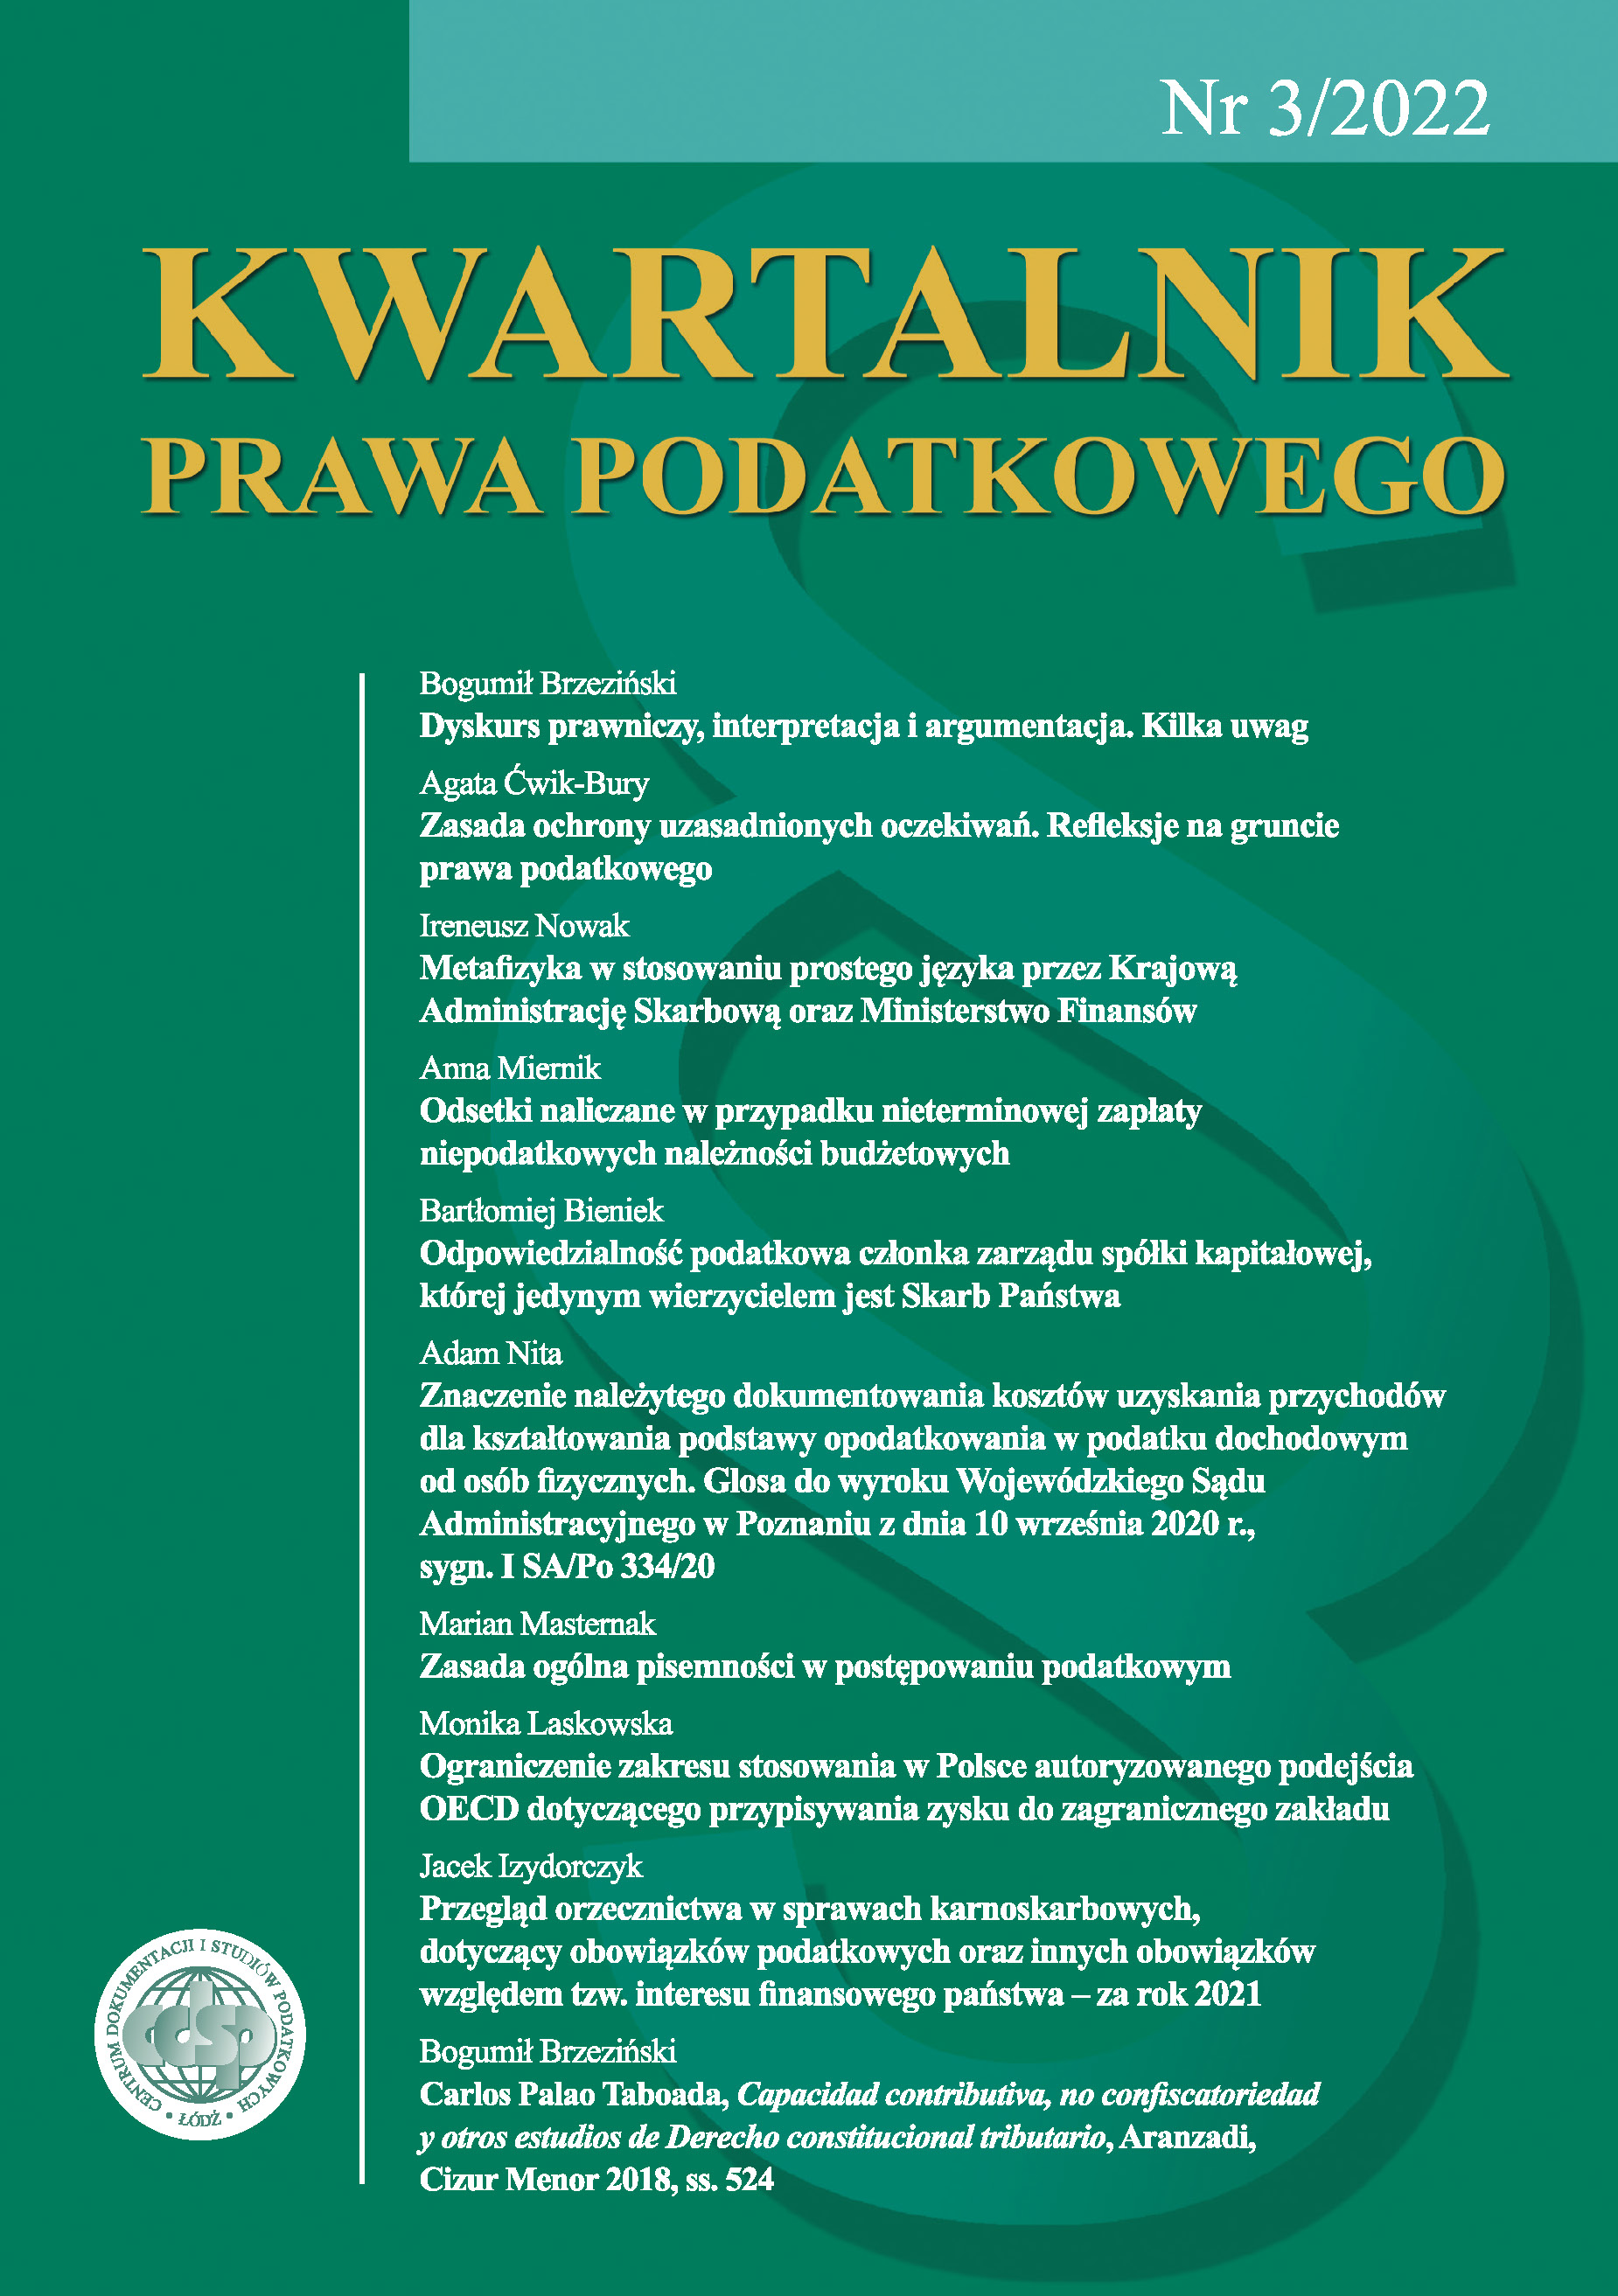 The importance of proper documentation of tax deductible costs for shaping the tax base in personal income tax. Gloss to the judgment of the Provincial Administrative Court in Poznań of 10 September 2020, reference number I SA/Po 334/20 Cover Image